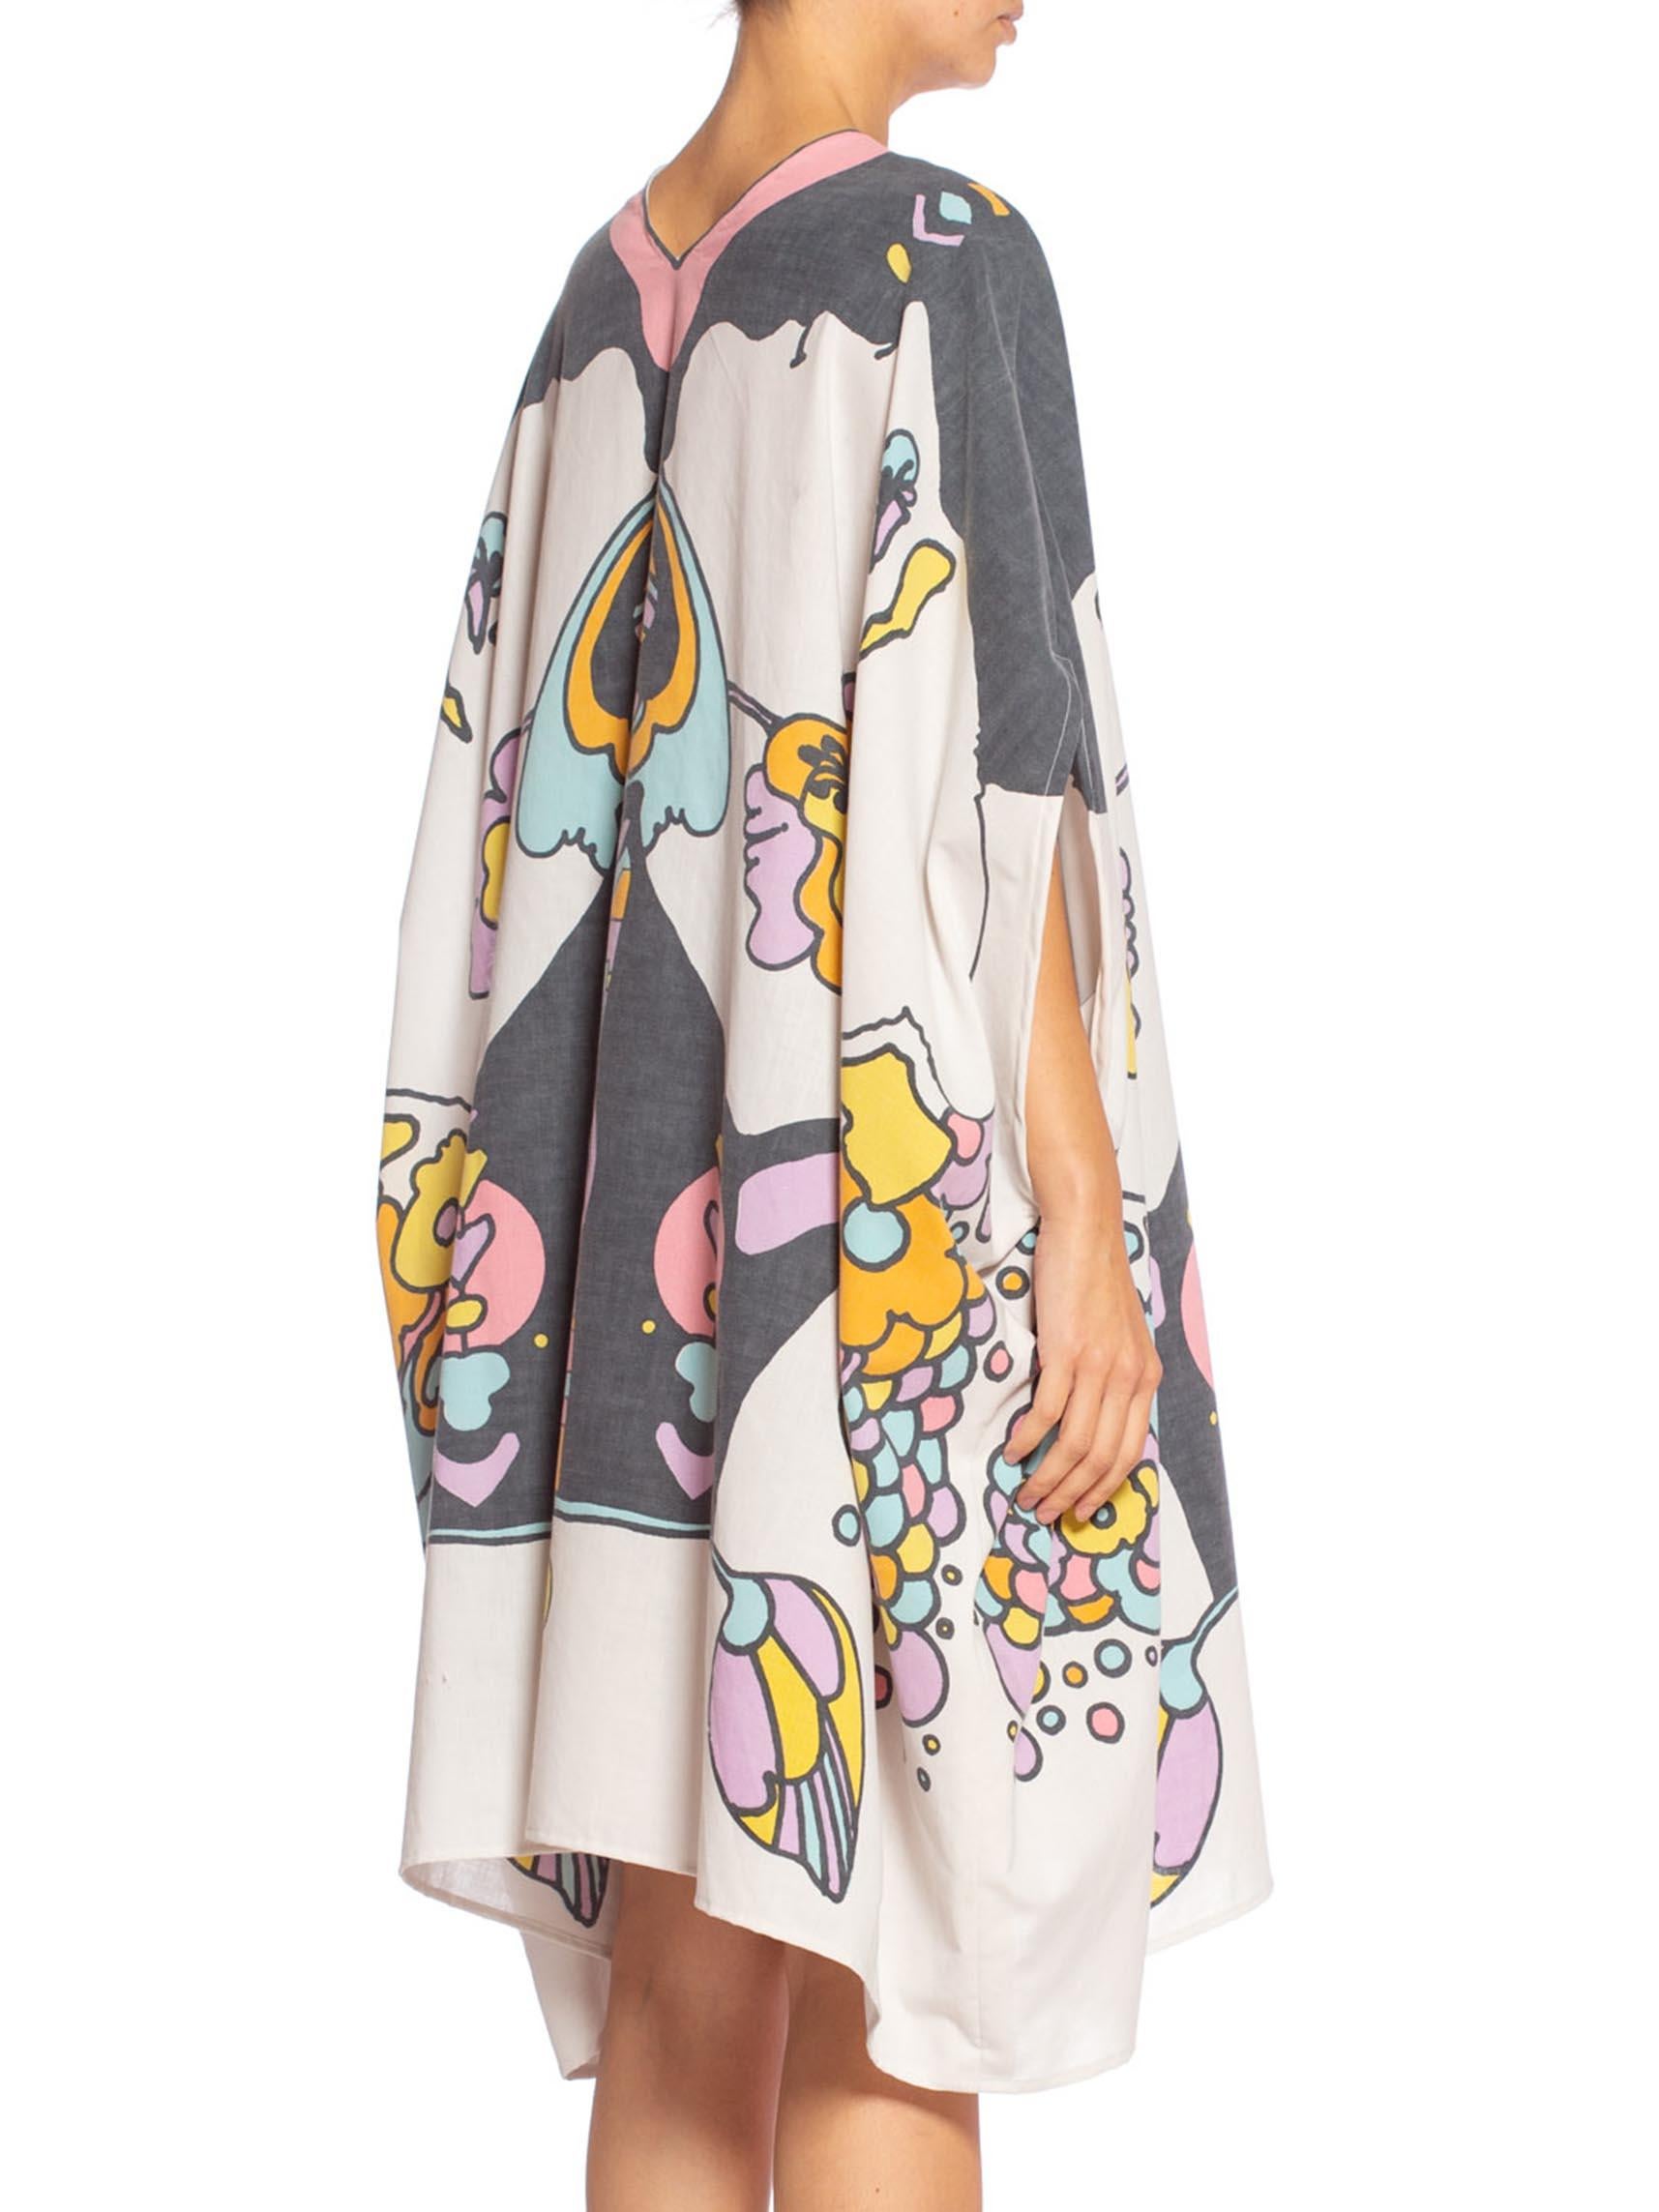 MORPHEW COLLECTION Style Psychedelic Cotton Peter Max Printed Kaftan For Sale 2